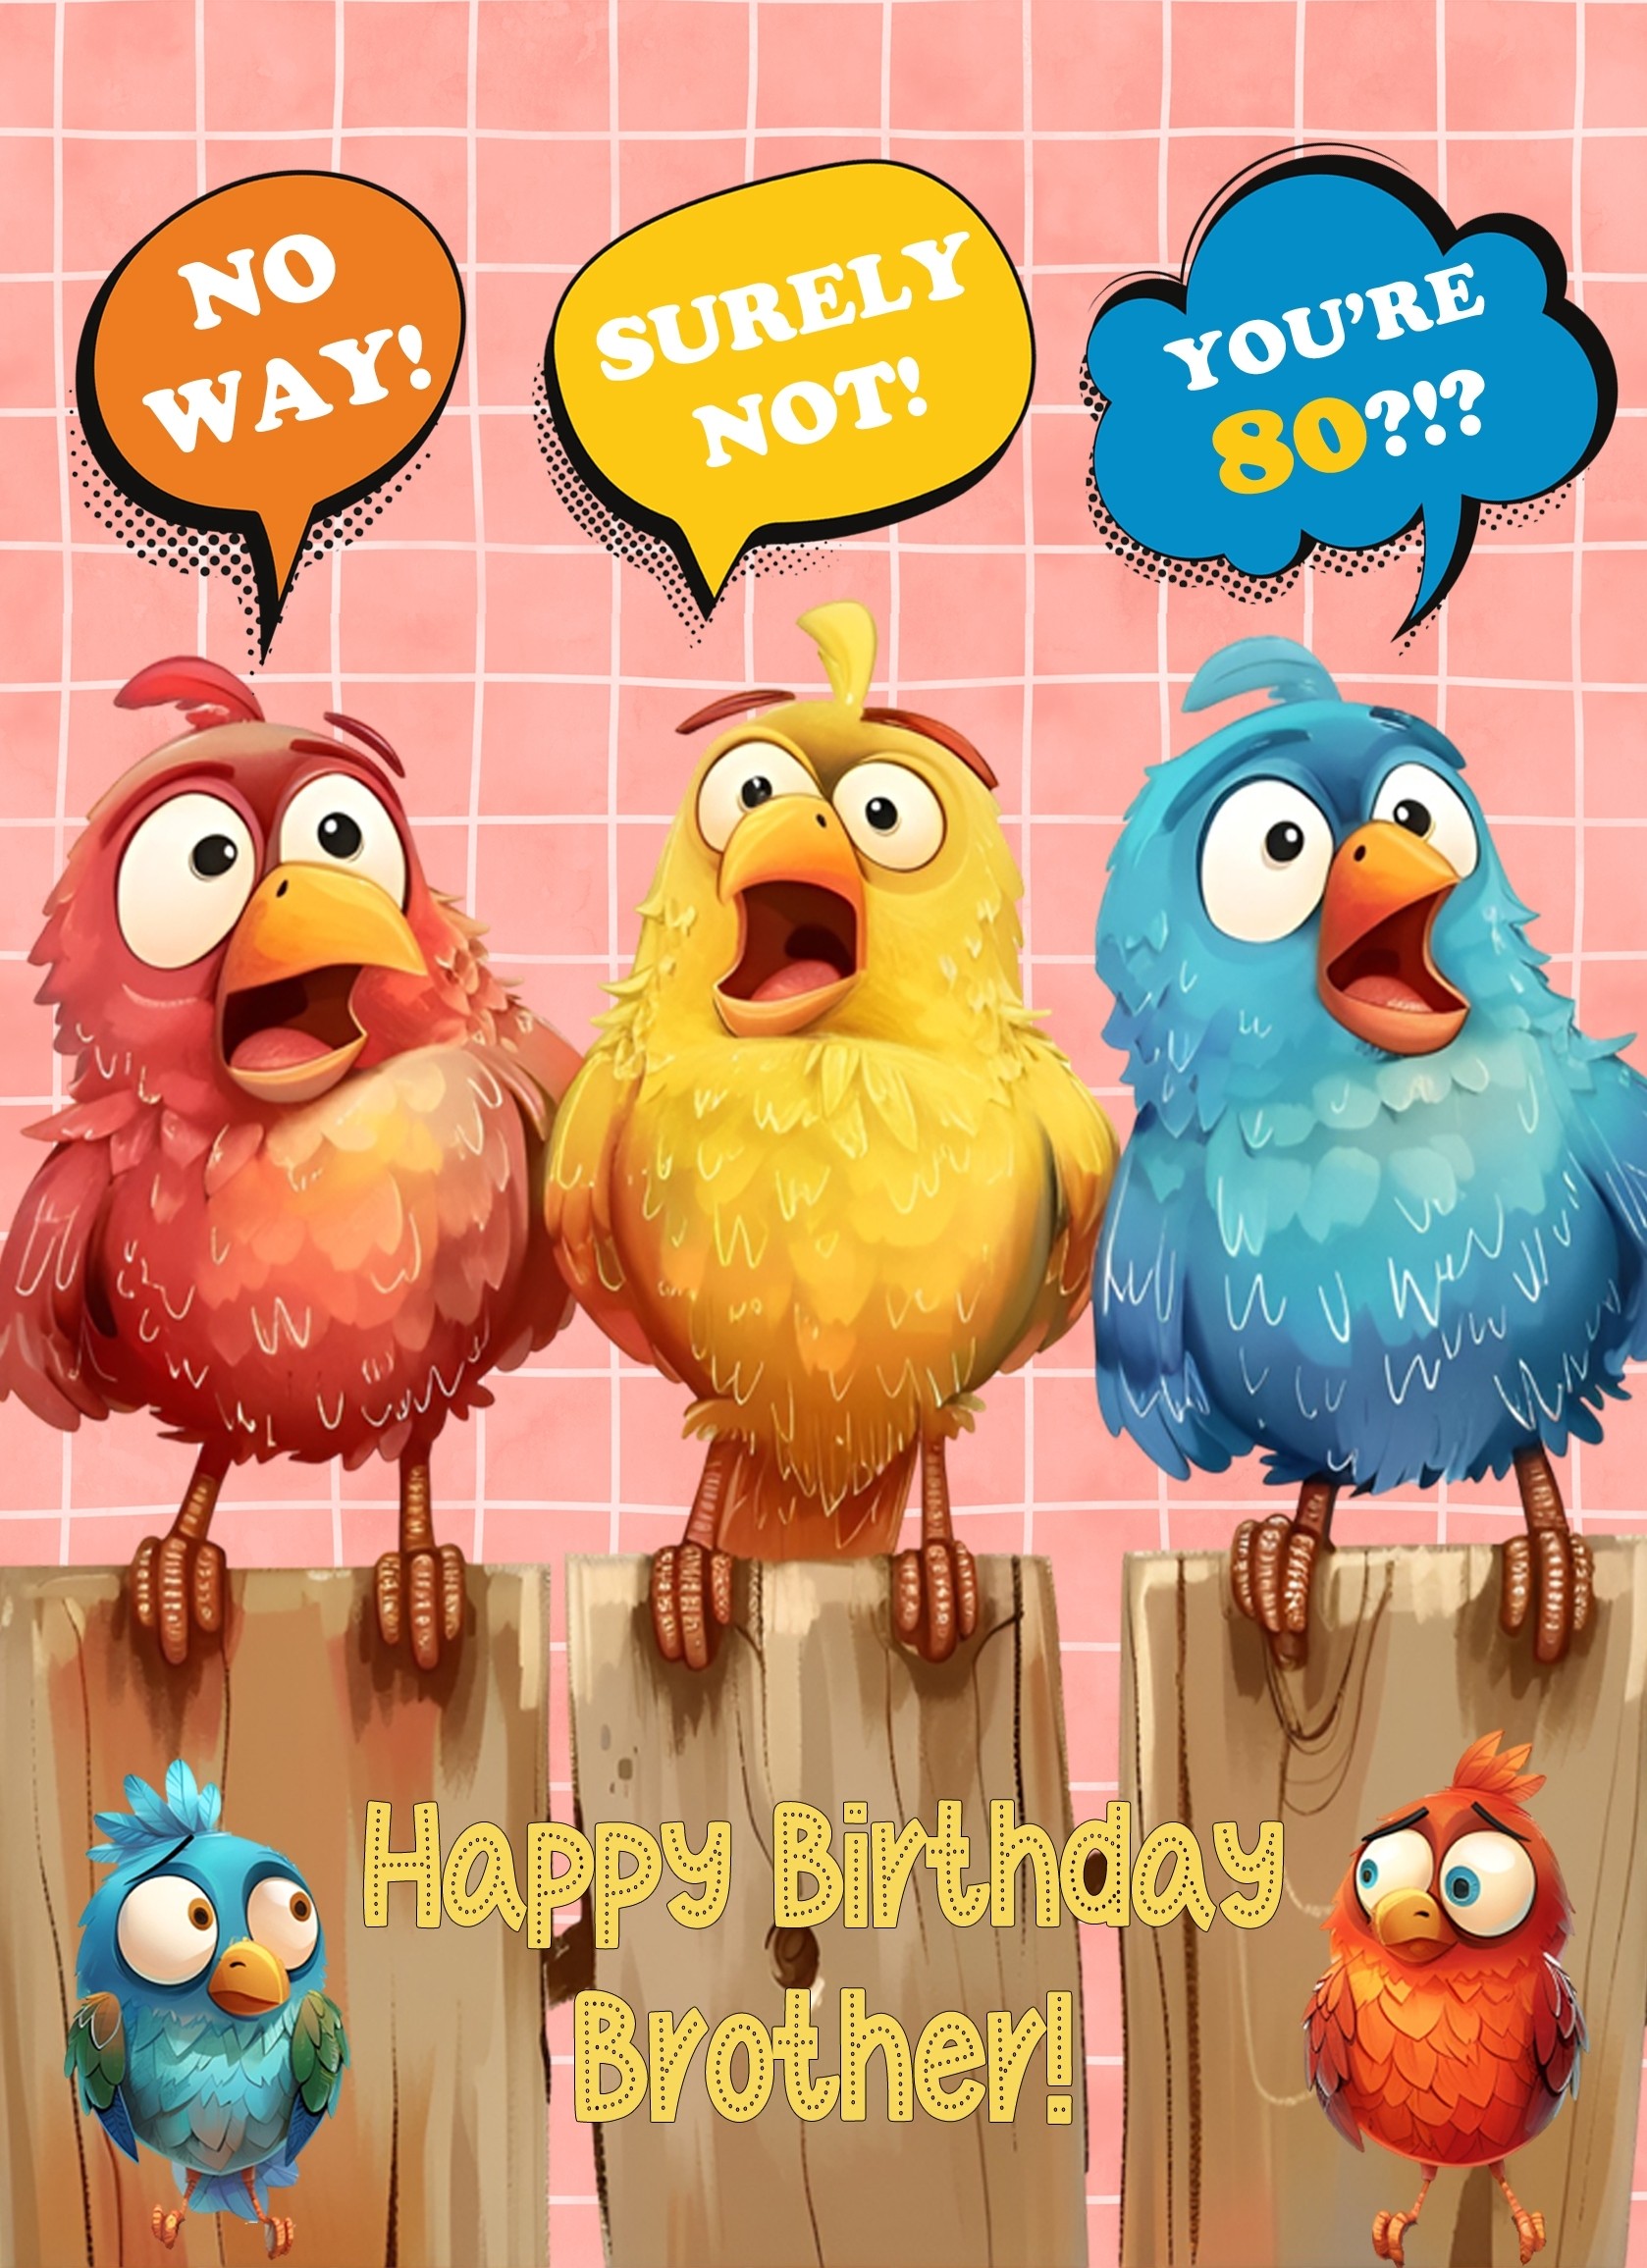 Brother 80th Birthday Card (Funny Birds Surprised)